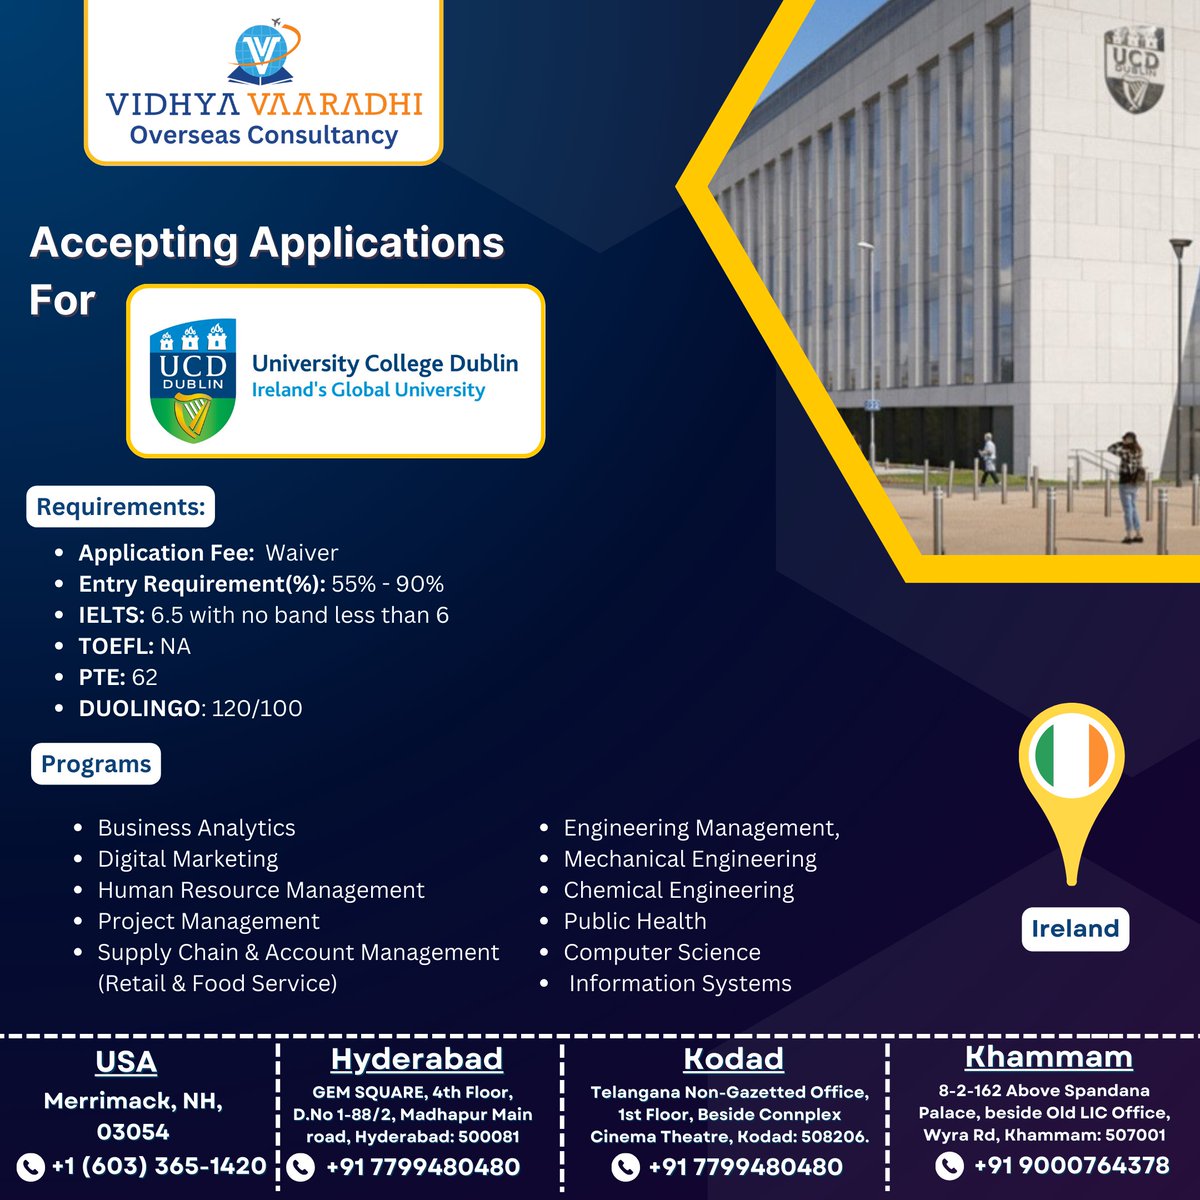 study in Ireland | Applications are currently being accepted for University College Dublin. Begin your journey in Ireland today!

#studyinireland #Irelandeducationconsultants #ucd #universitycollegedublin #ireland #accounting #computerscience #businessanalytics #digitalmarketing